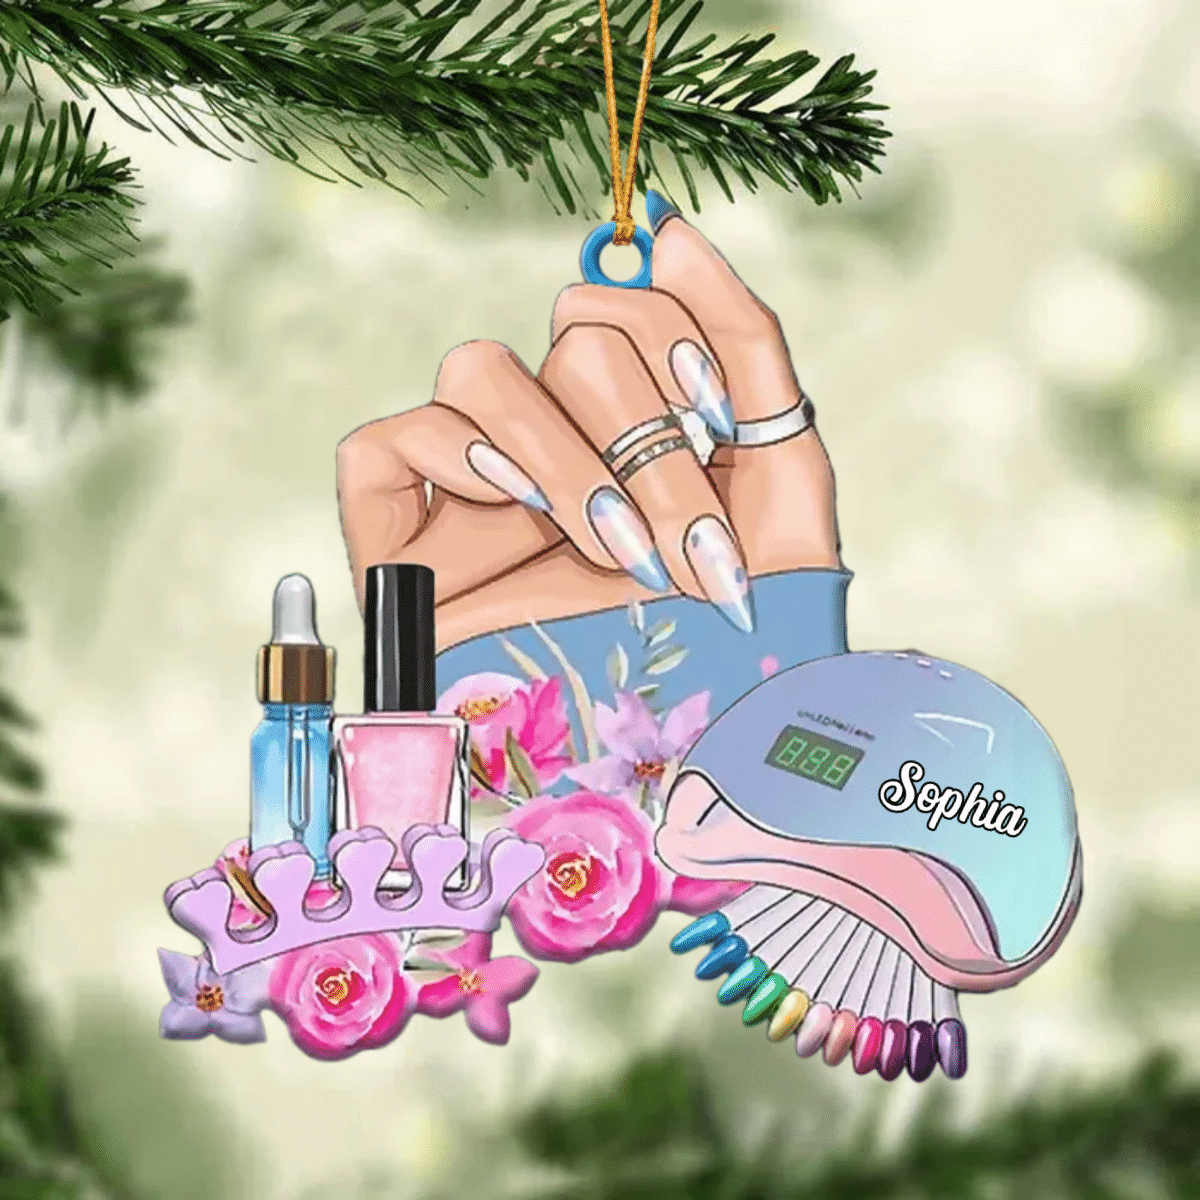 Personalized Nail Technician Manicurist Christmas Gift Custom Shaped Ornament for Nail Technician/ Gift for Her